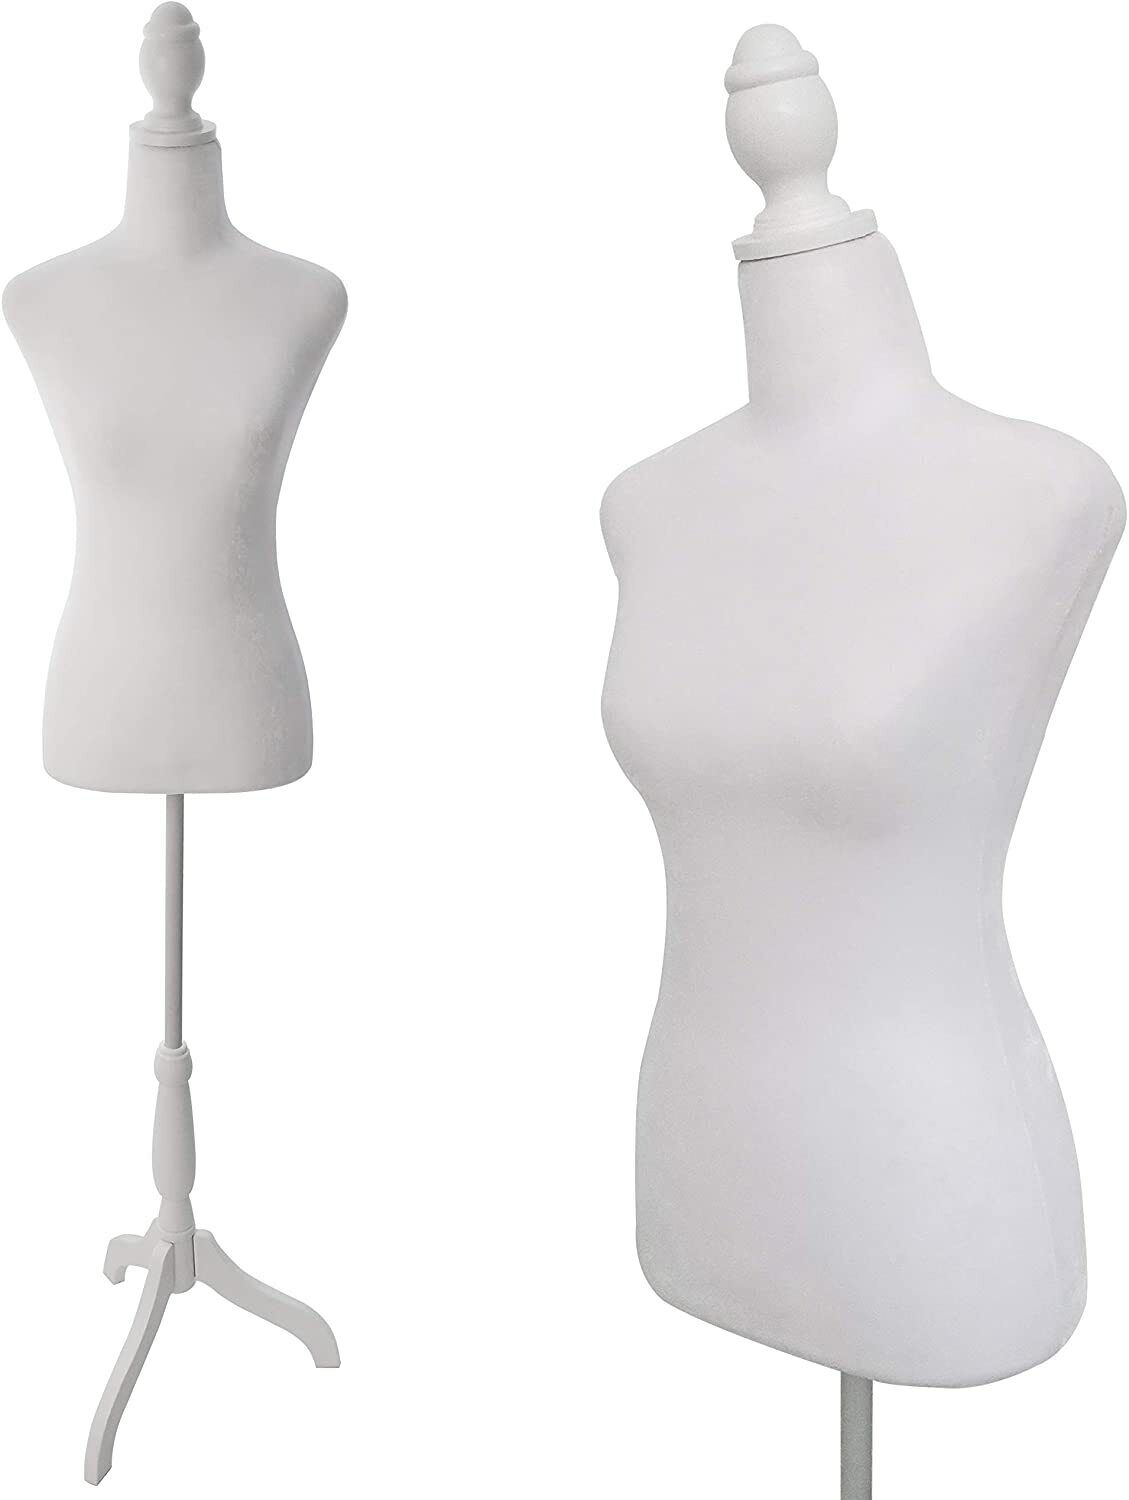 Used Female Dress Form  Mannequin Body Torso with Wooden Tripod Base Stand